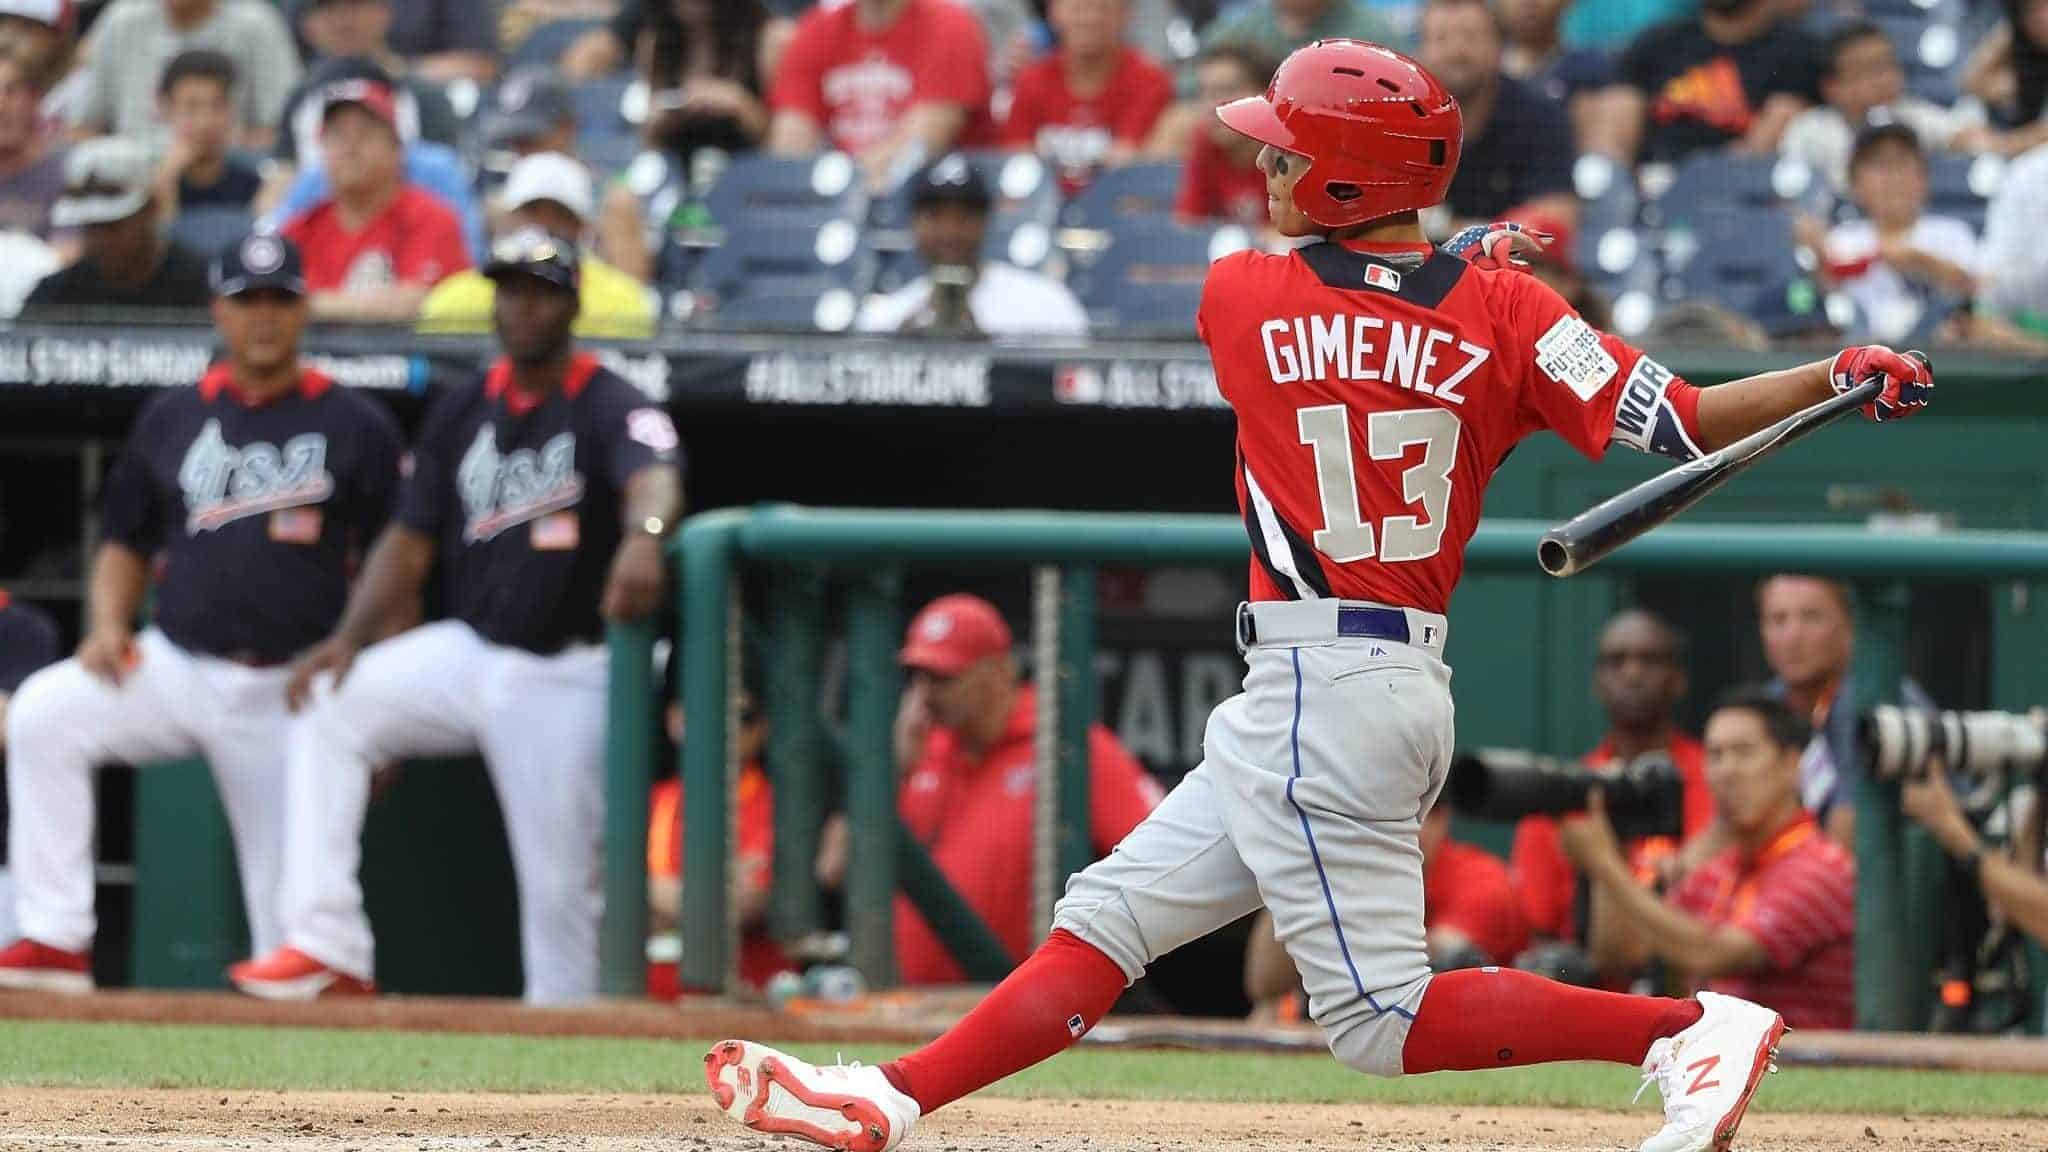 WASHINGTON, DC - JULY 15: Andres Gimenez #13 at bat during the SiriusXM All-Star Futures Game at Nationals Park on July 15, 2018 in Washington, DC.